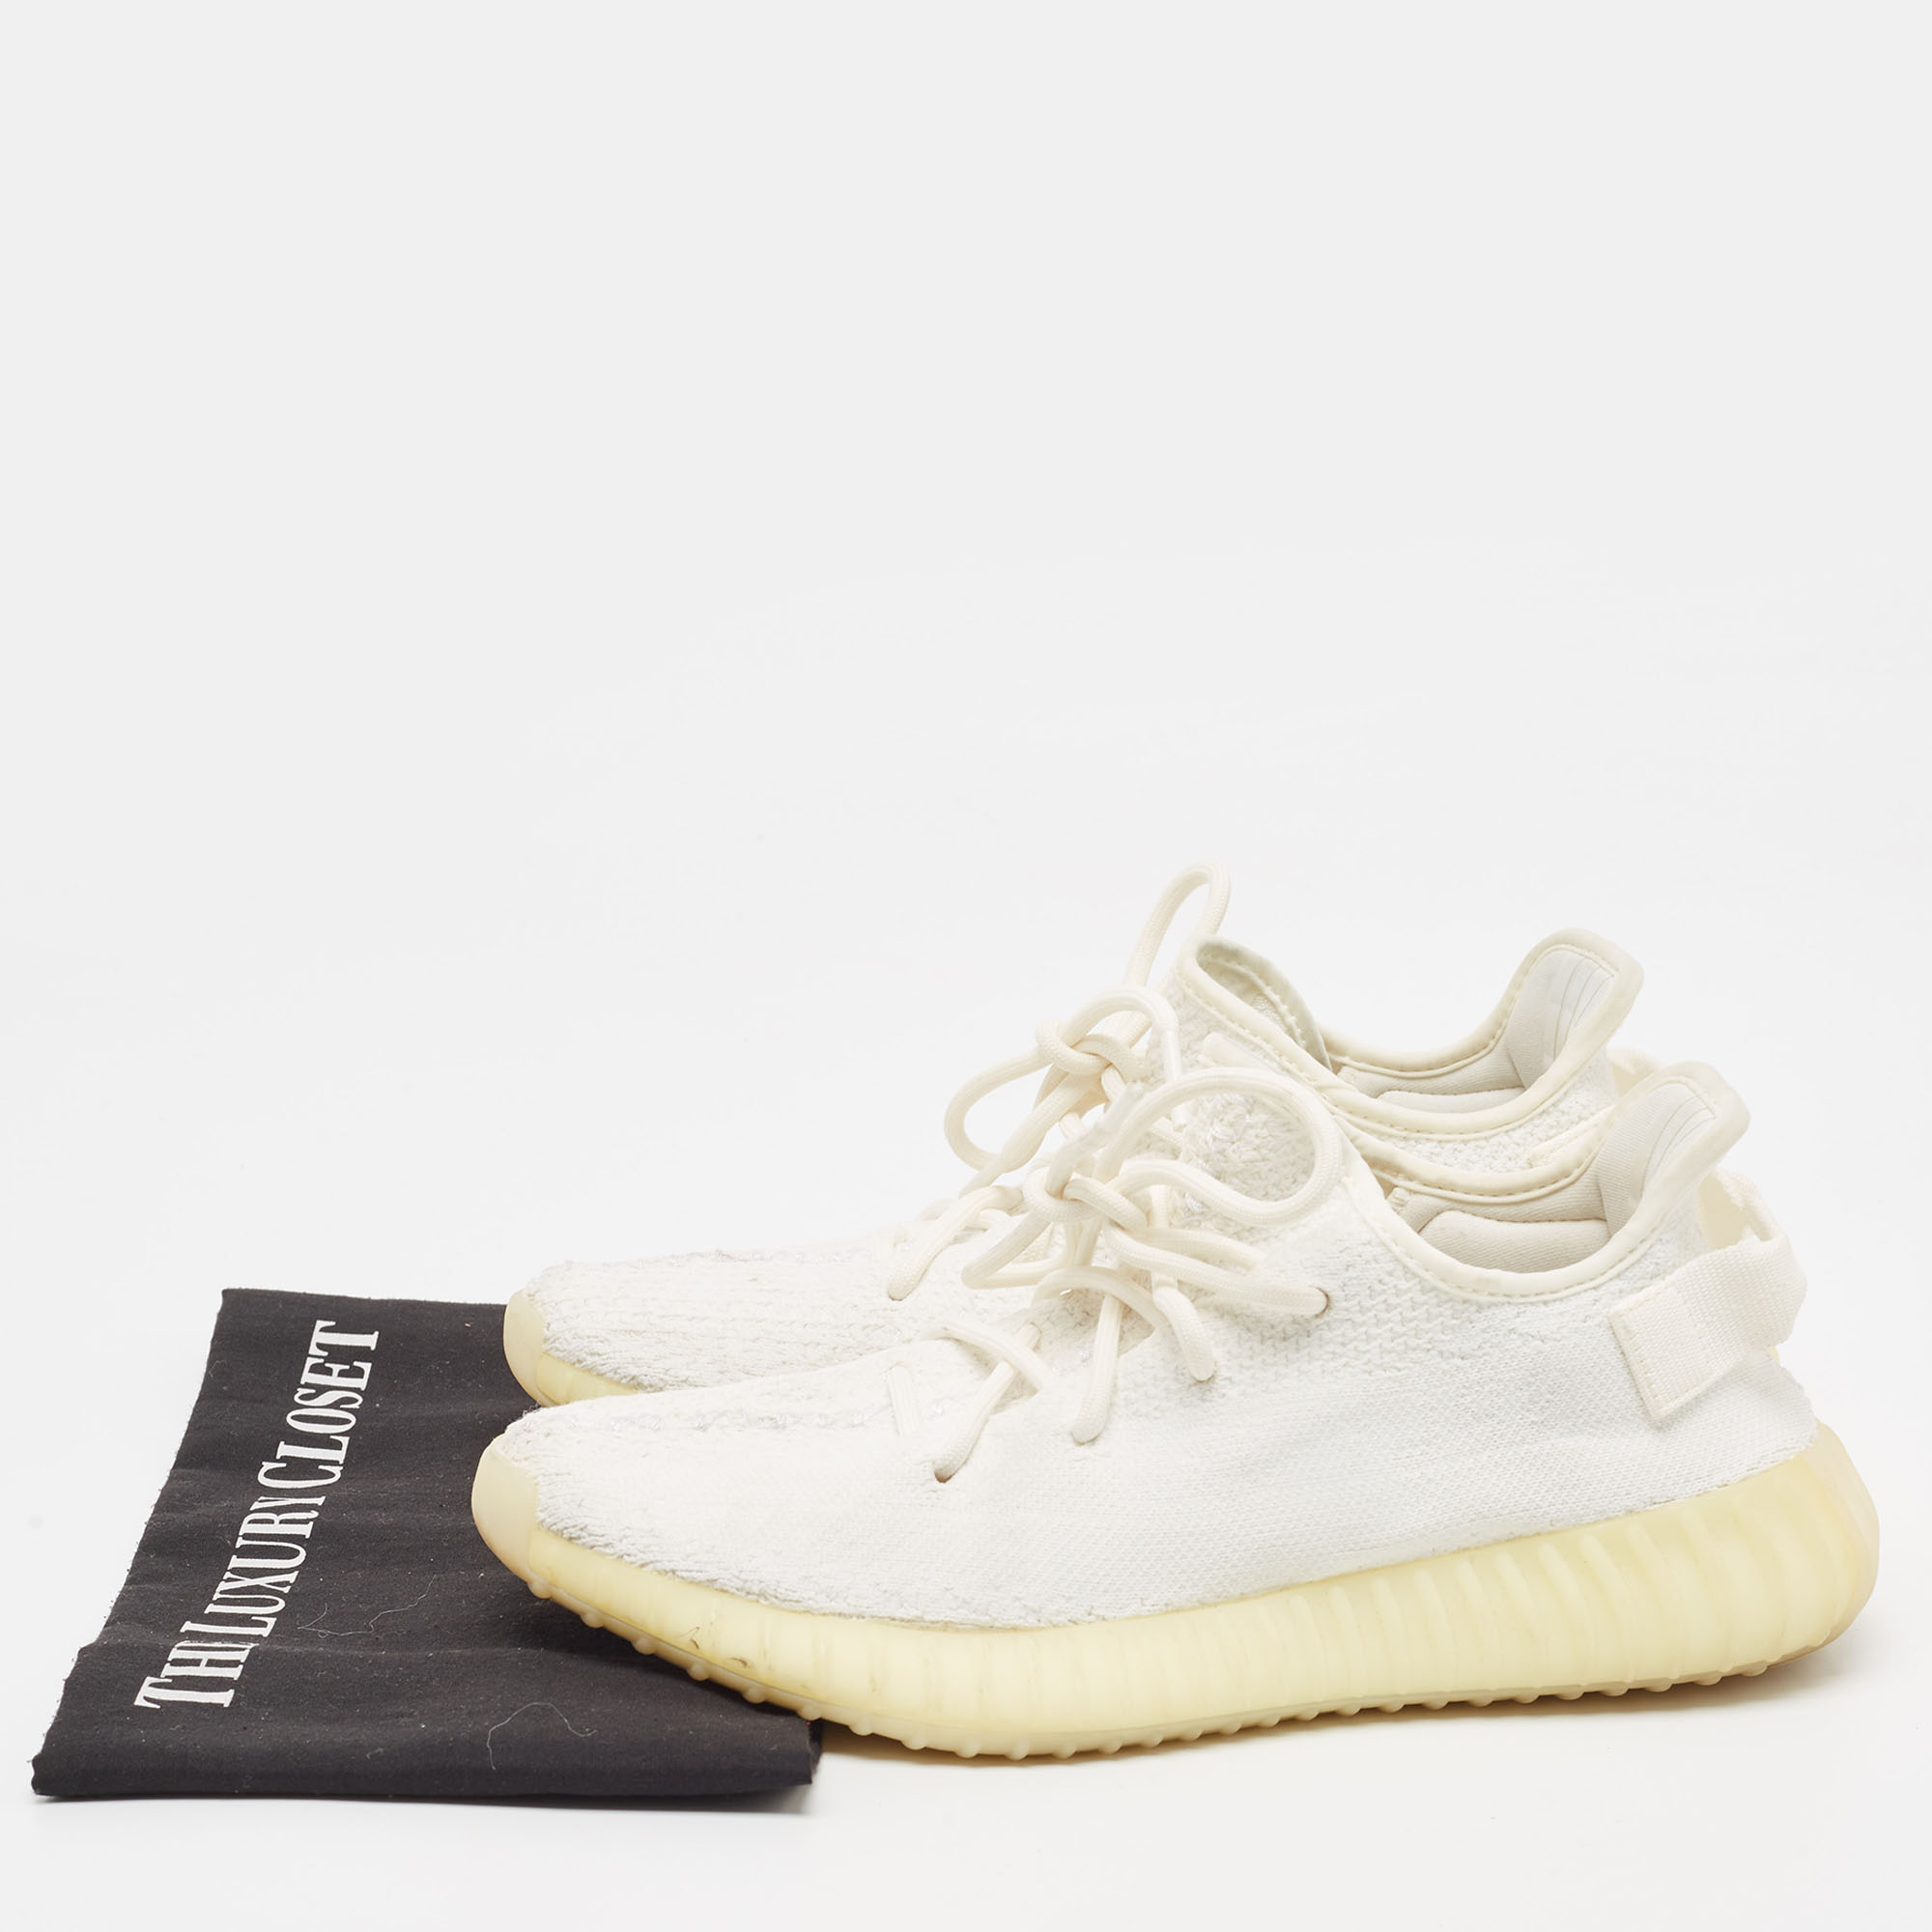 Yeezy X Adidas White Knit Fabric Boost 350 V2 Cream White Sneakers Size 40 2/3